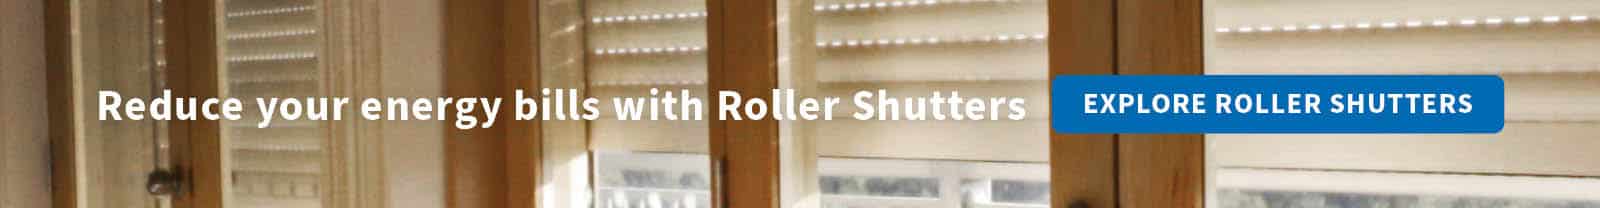 Reduce energy bills with Roller Shutters